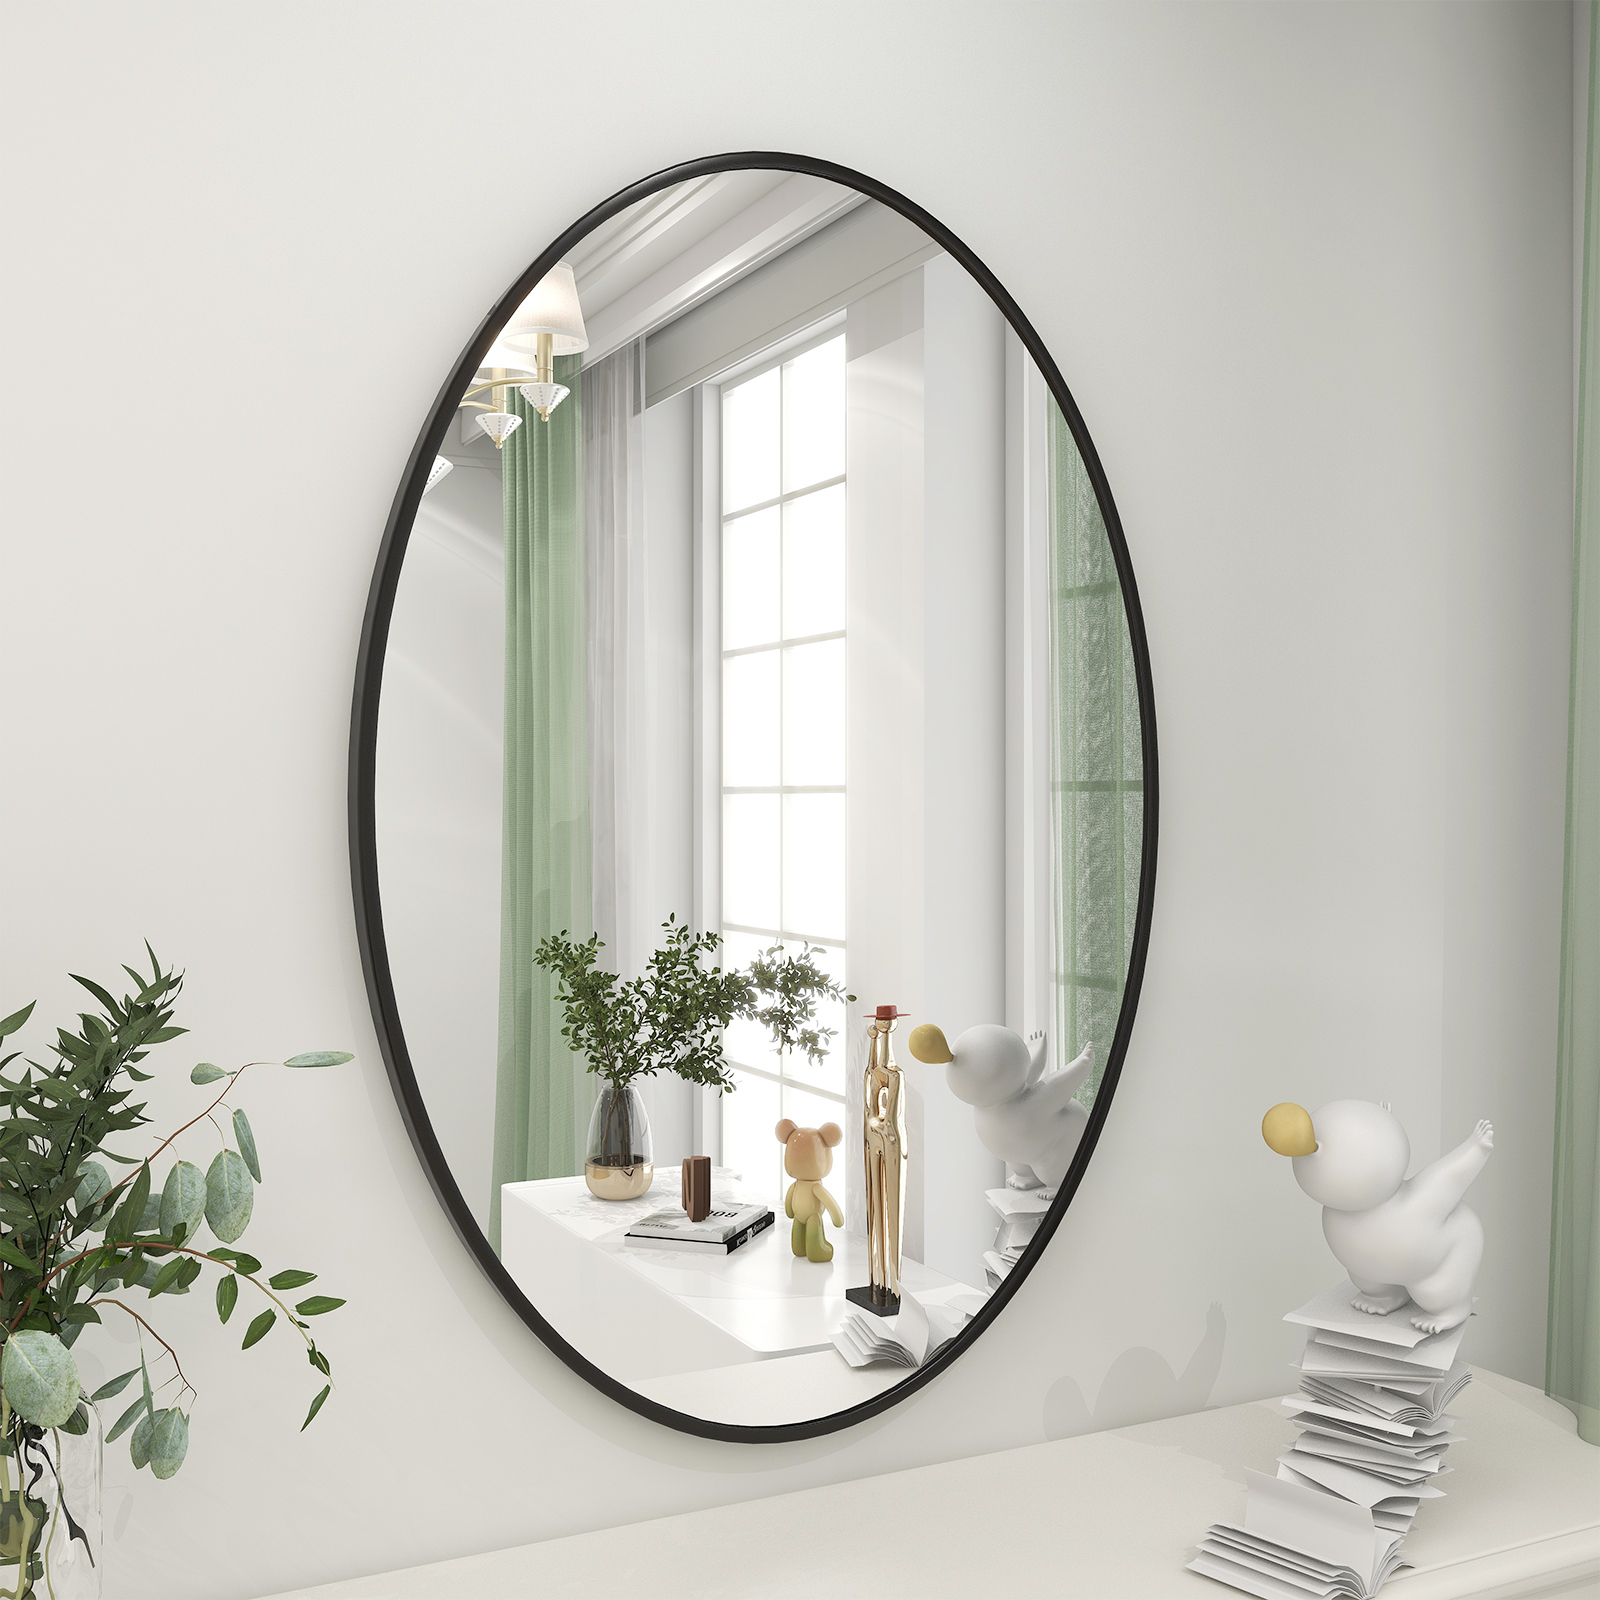  BEAUTYPEAK 24 x 36 Wall Mirror, Deep Frame Bathroom Mirror  with ShatterVue™ Technology Nano-strengthened Glass, Farmhouse Look Wall  Mounted Vanity Mirror Hanging Horizontally or Vertically, Black : Home &  Kitchen